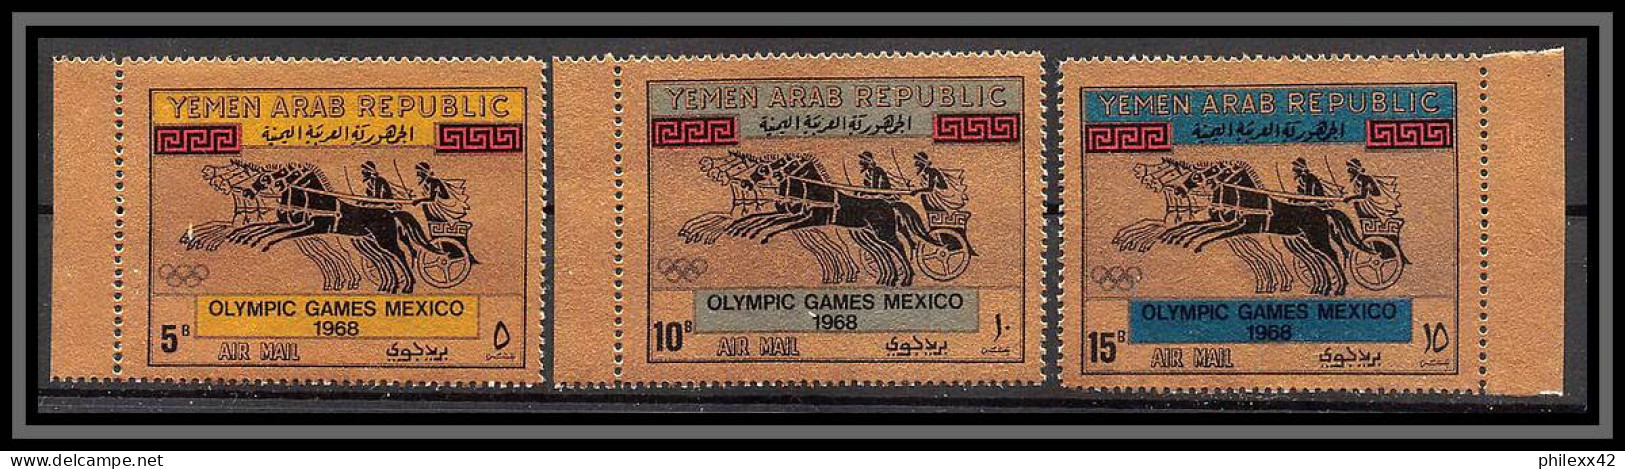 Nord Yemen YAR - 4402/ N°742/744 Jeux Olympiques (olympic Games) Mexico 1968 OR Gold Stamps Neuf ** MNH - Zomer 1968: Mexico-City